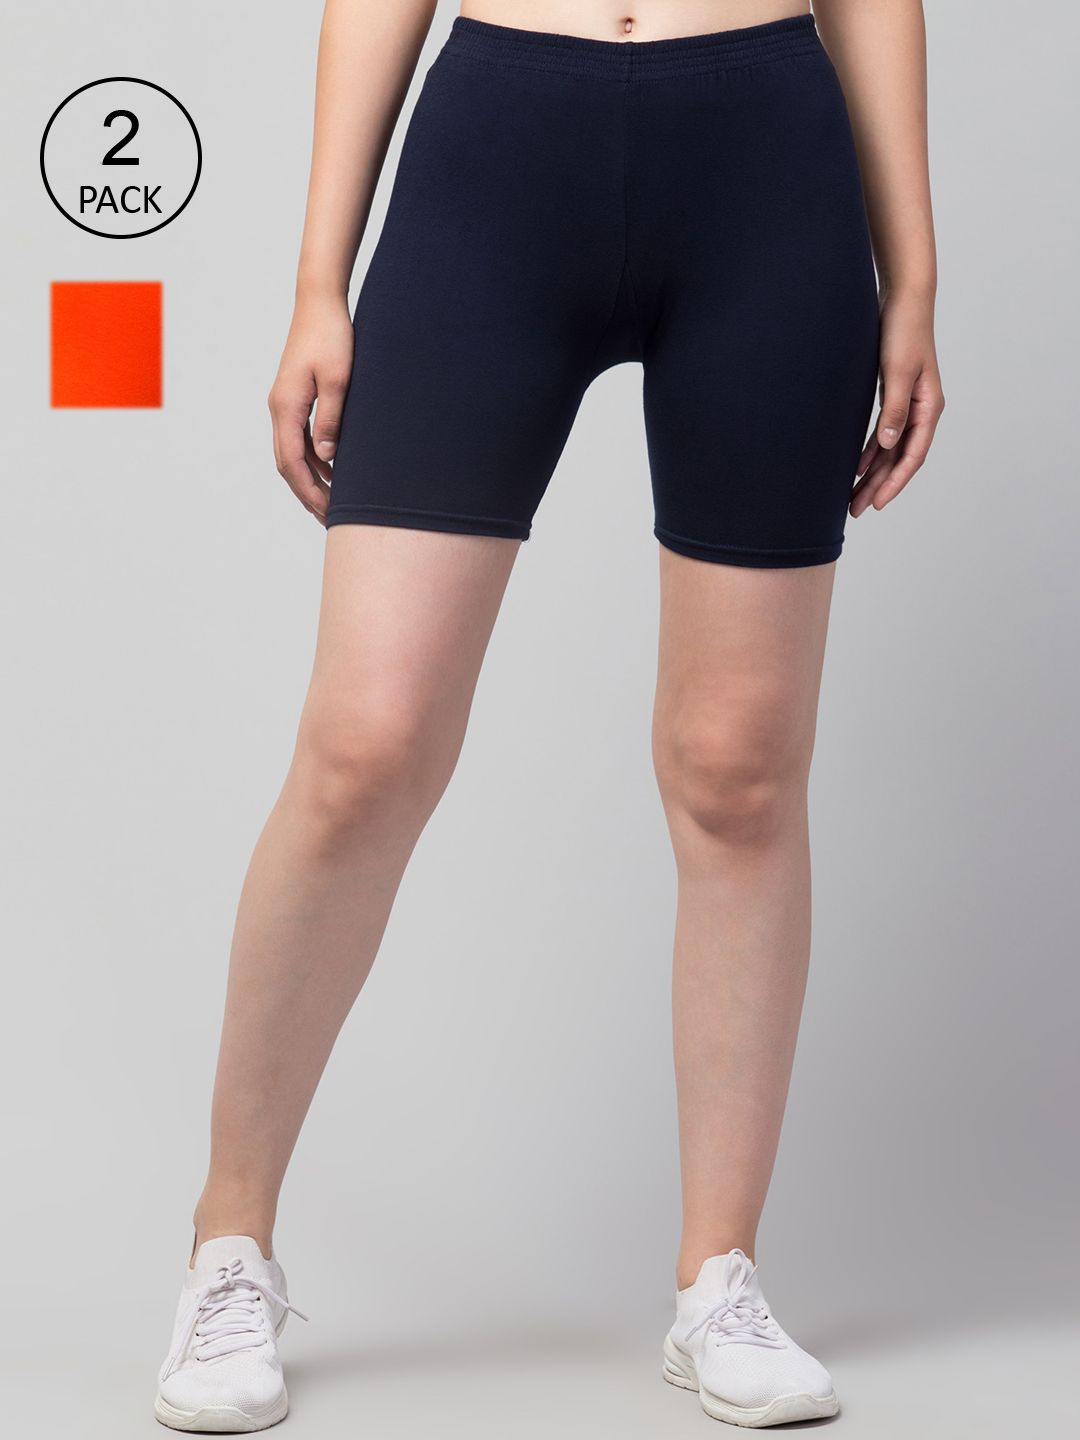 Apraa & Parma Women Slim Fit Cycling Sports Shorts Price in India